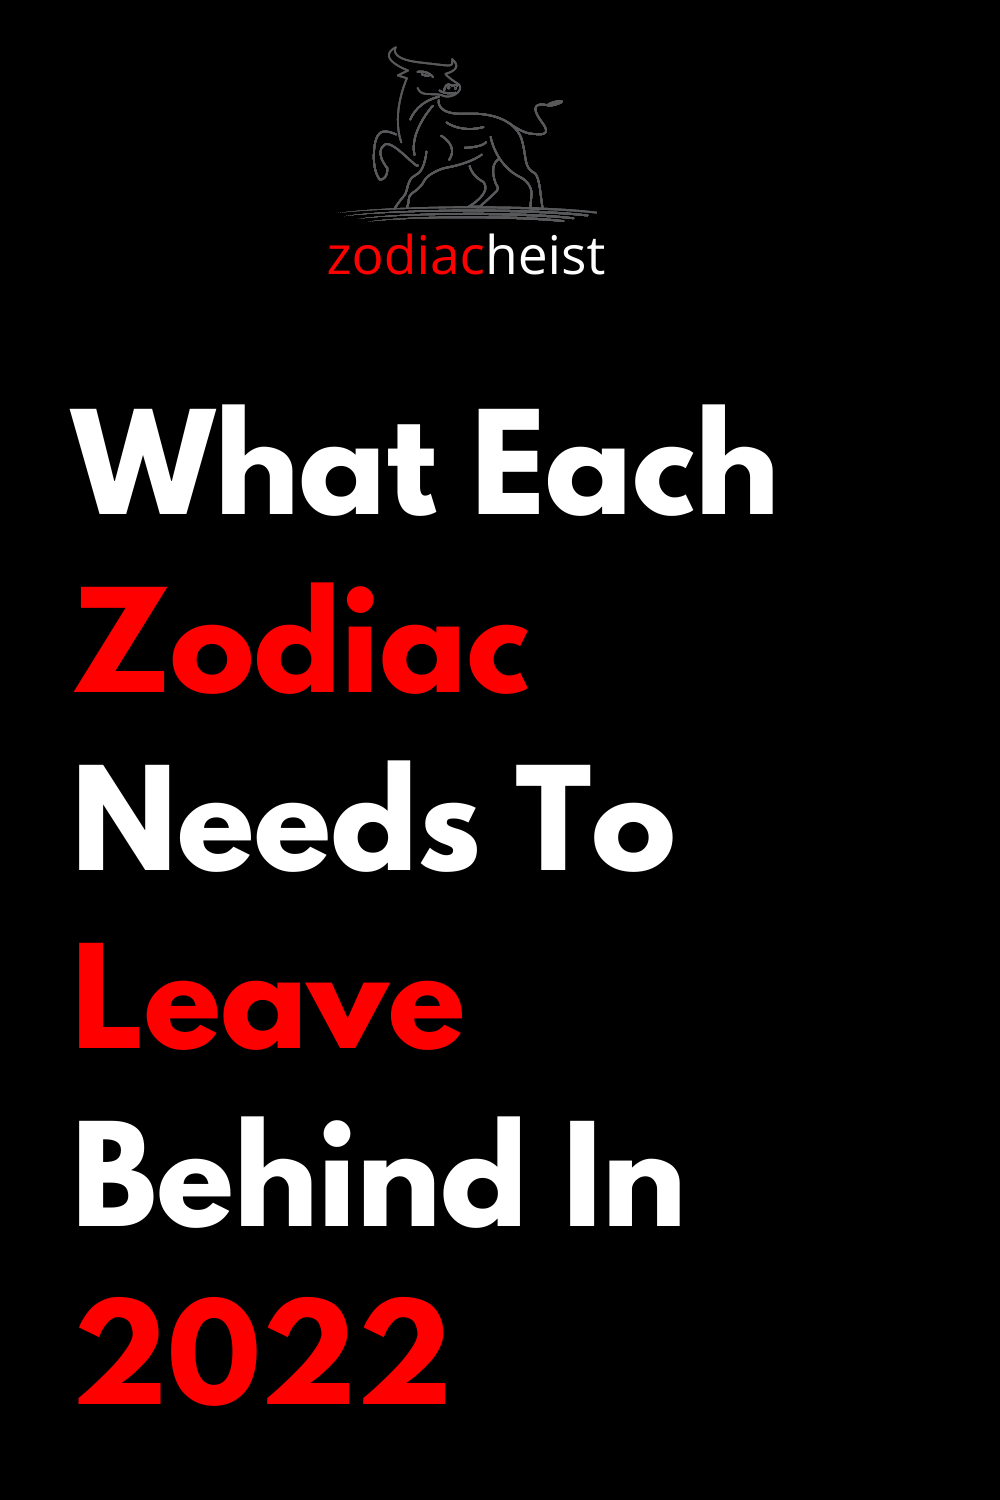 What Each Zodiac Needs To Leave Behind In 2022